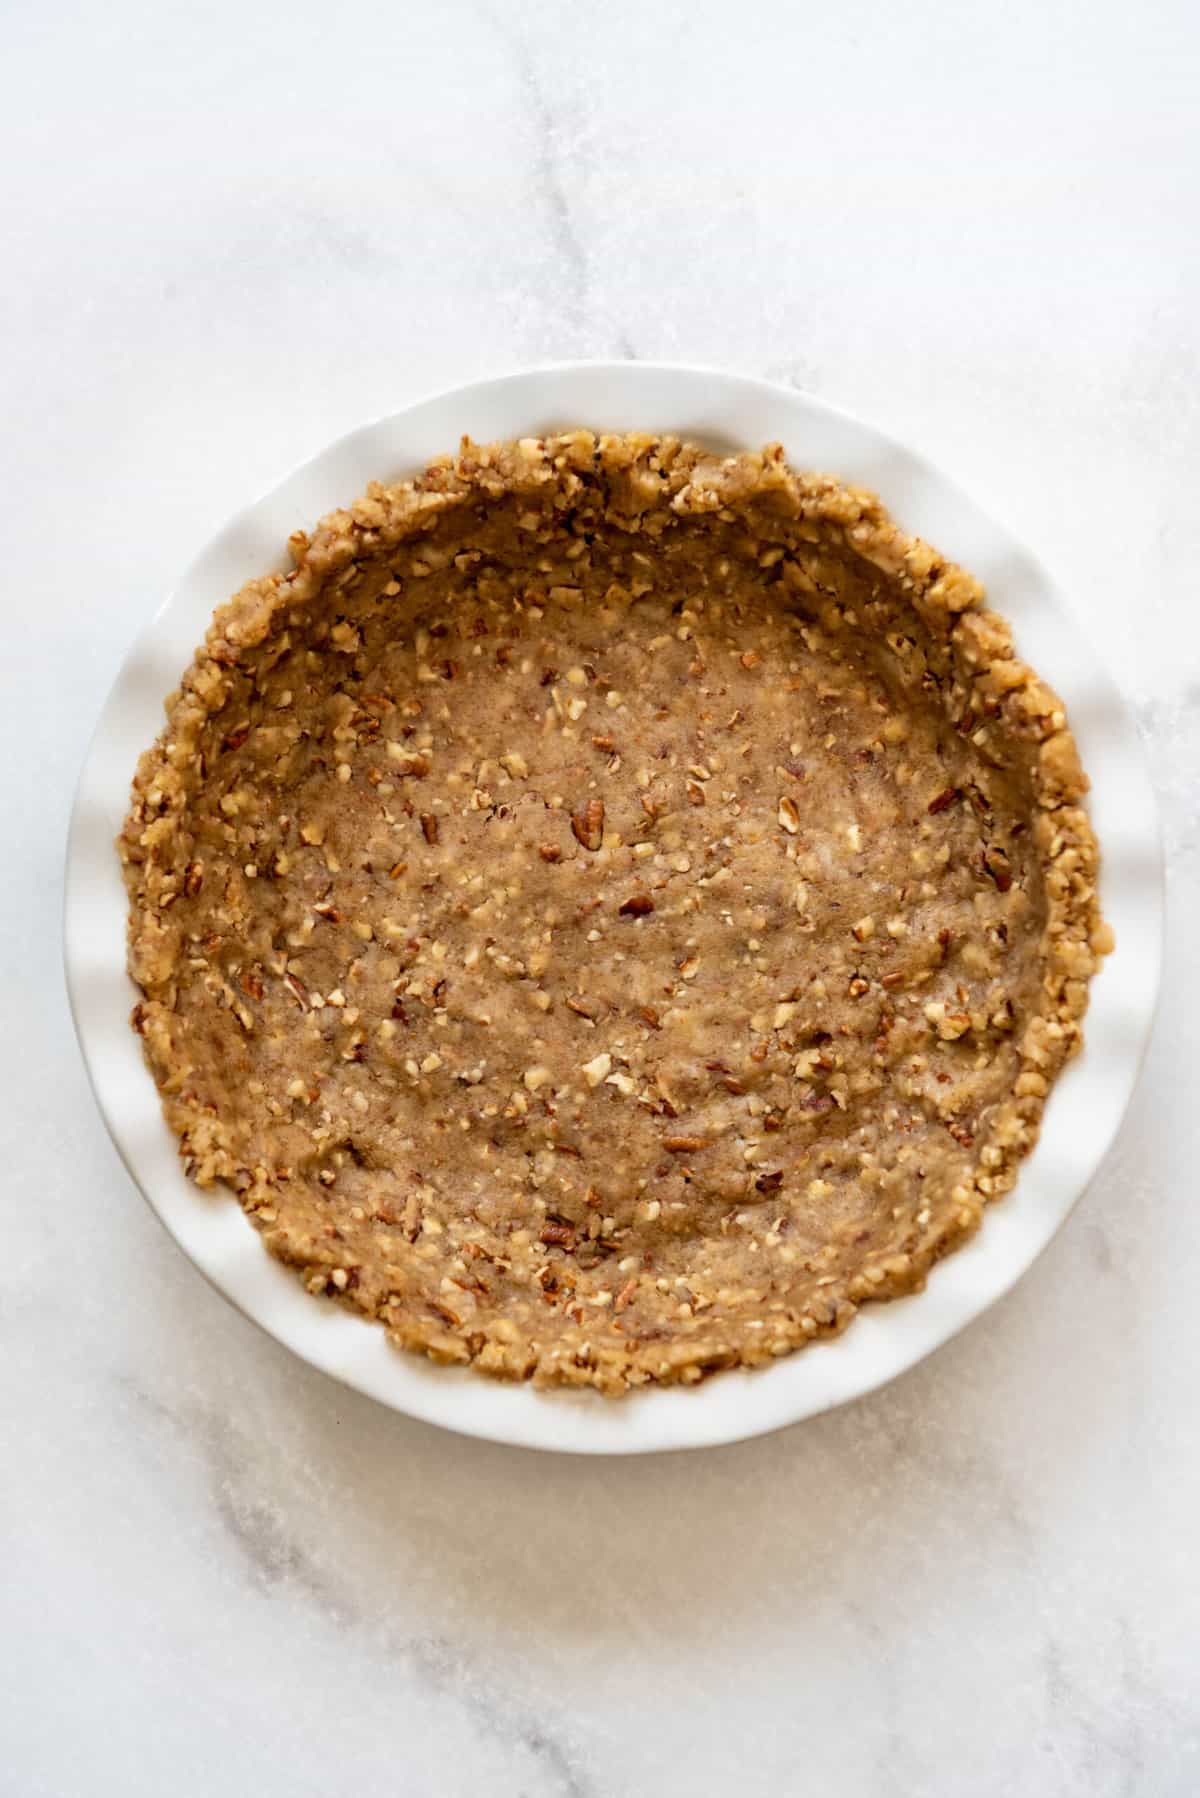 An image of a pecan pie crust for possum pie in a white baking dish.